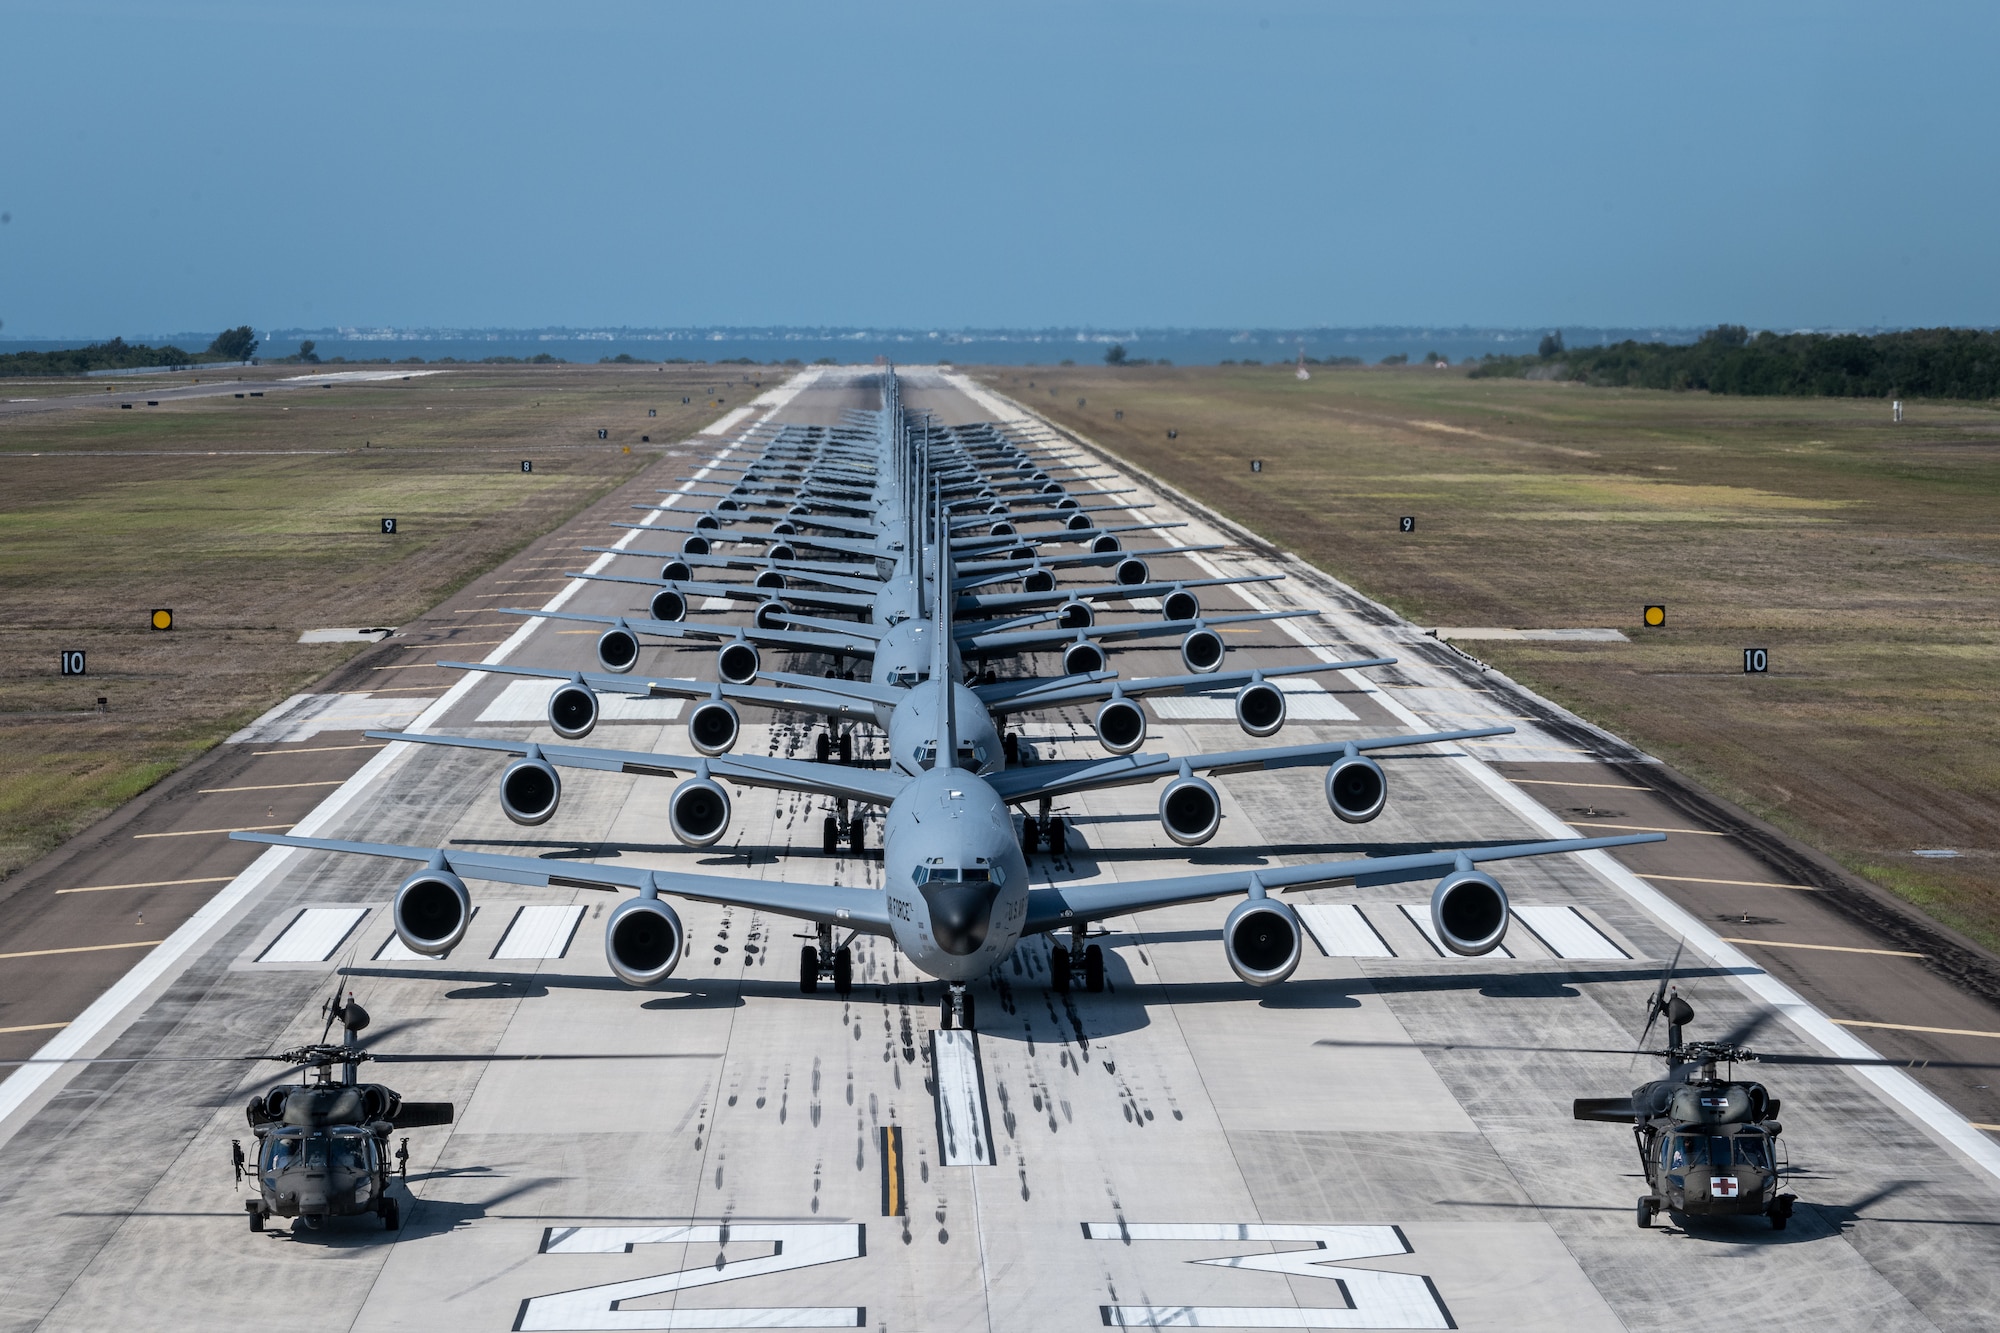 Violent Storm proved that MacDill AFB has the capability to project overwhelming air power in a short timeframe. (U.S. Air Force photo by Airman 1st Class Zachary Foster)